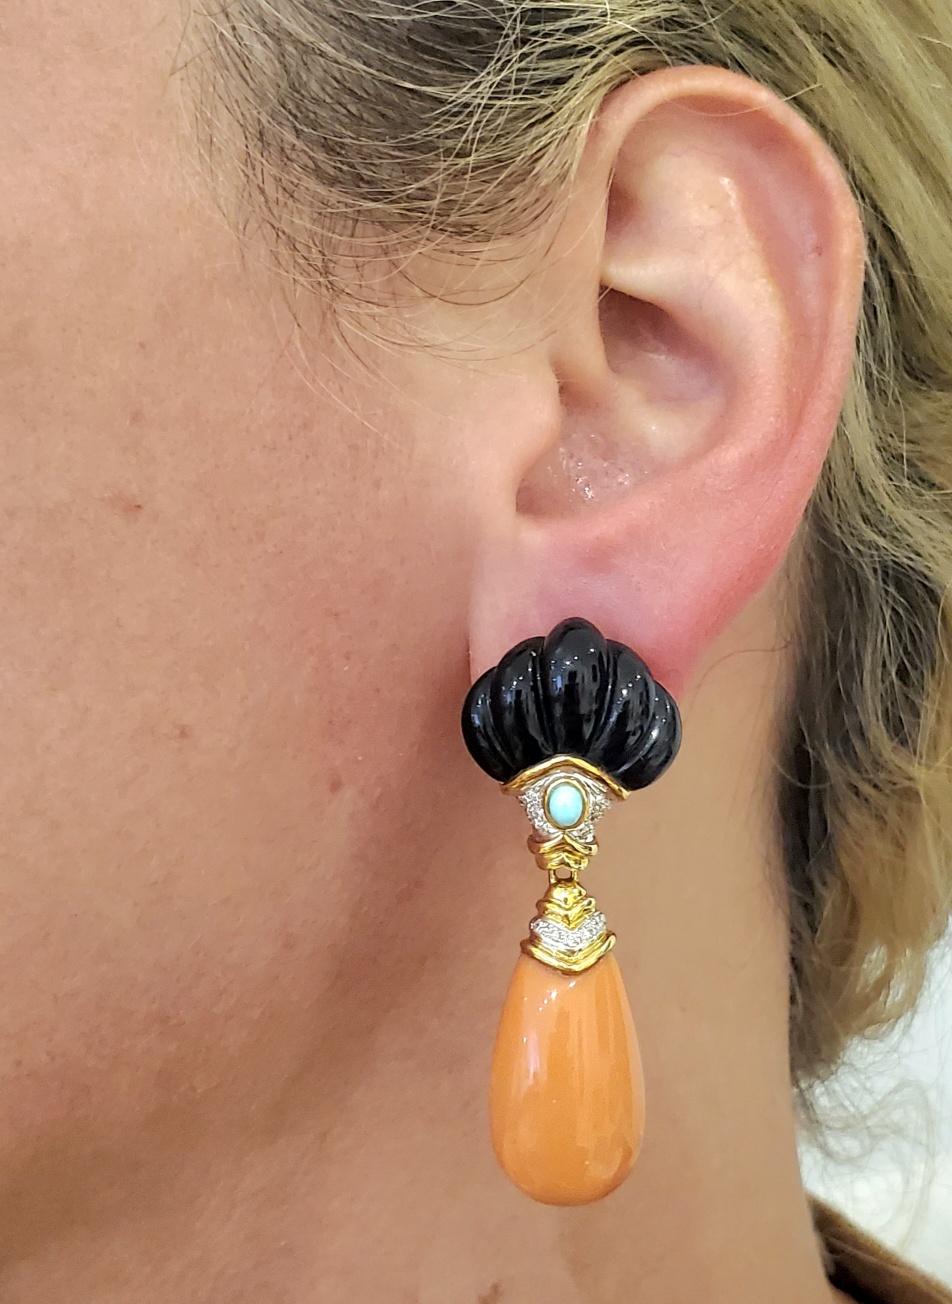 Convertible drops earrings designed in Italy.

Beautiful colorful pieces, crafted in Italy in solid yellow gold of 18 karats with high polished finish. These drops earrings are convertible for day and night and are fitted with a hinged slash to